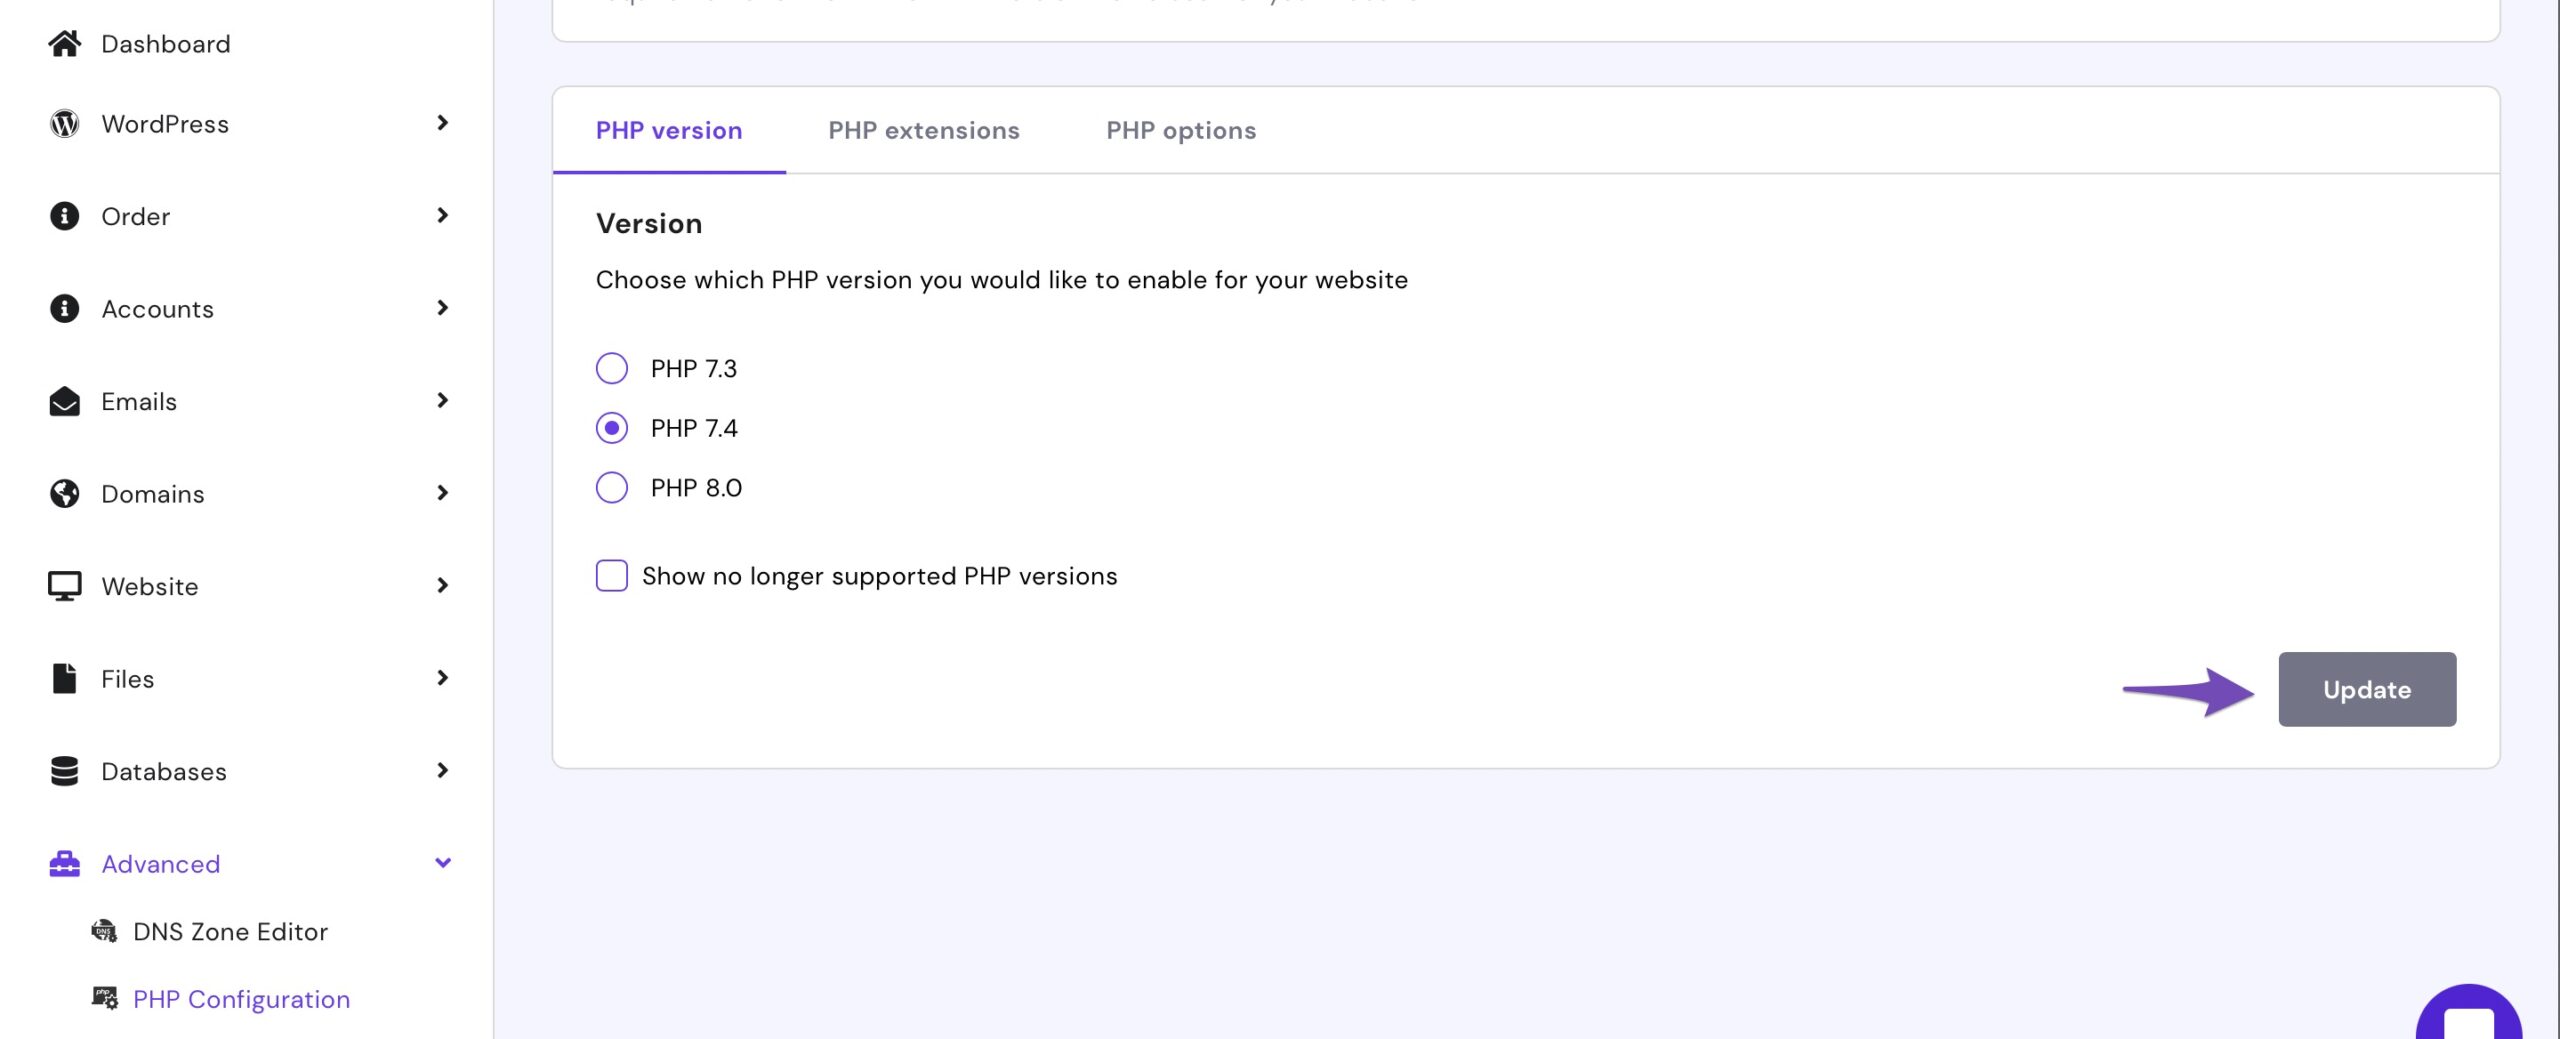 Select PHP version